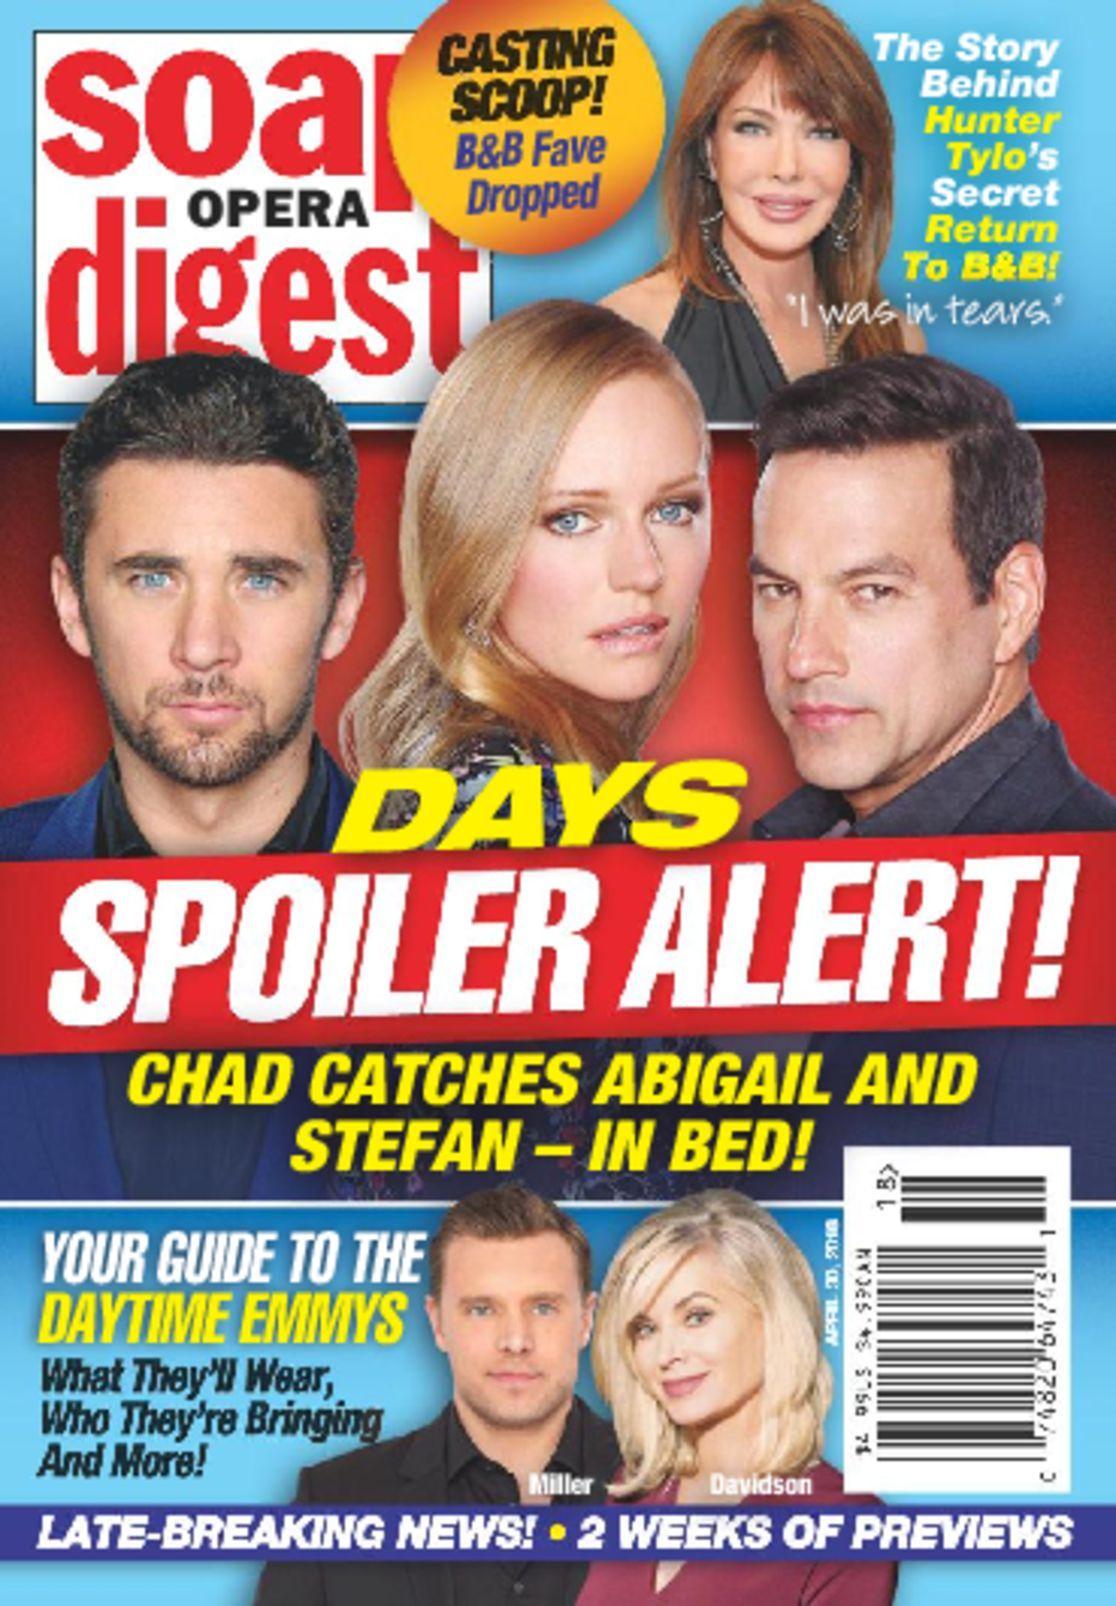 soap opera digest news and updates